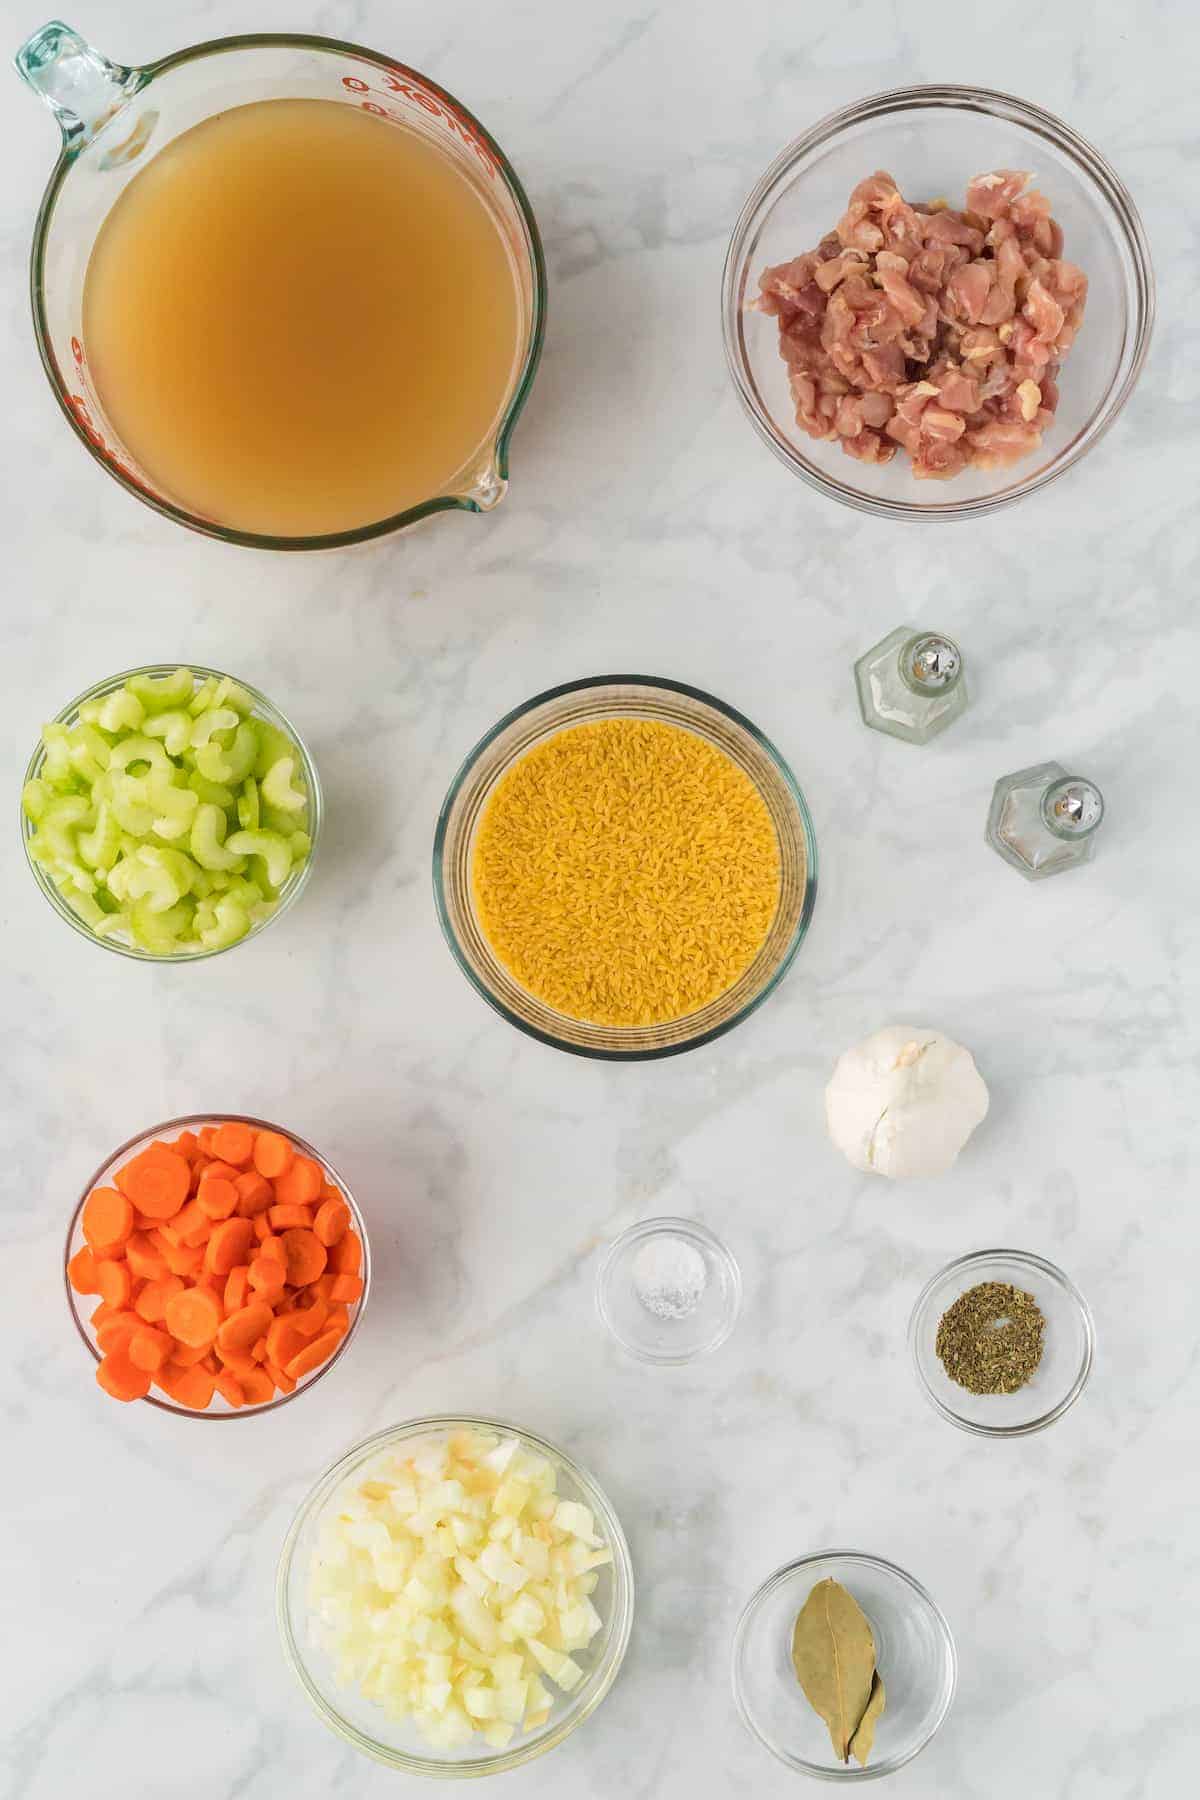 ingredients for the chicken soup in small glass bowls